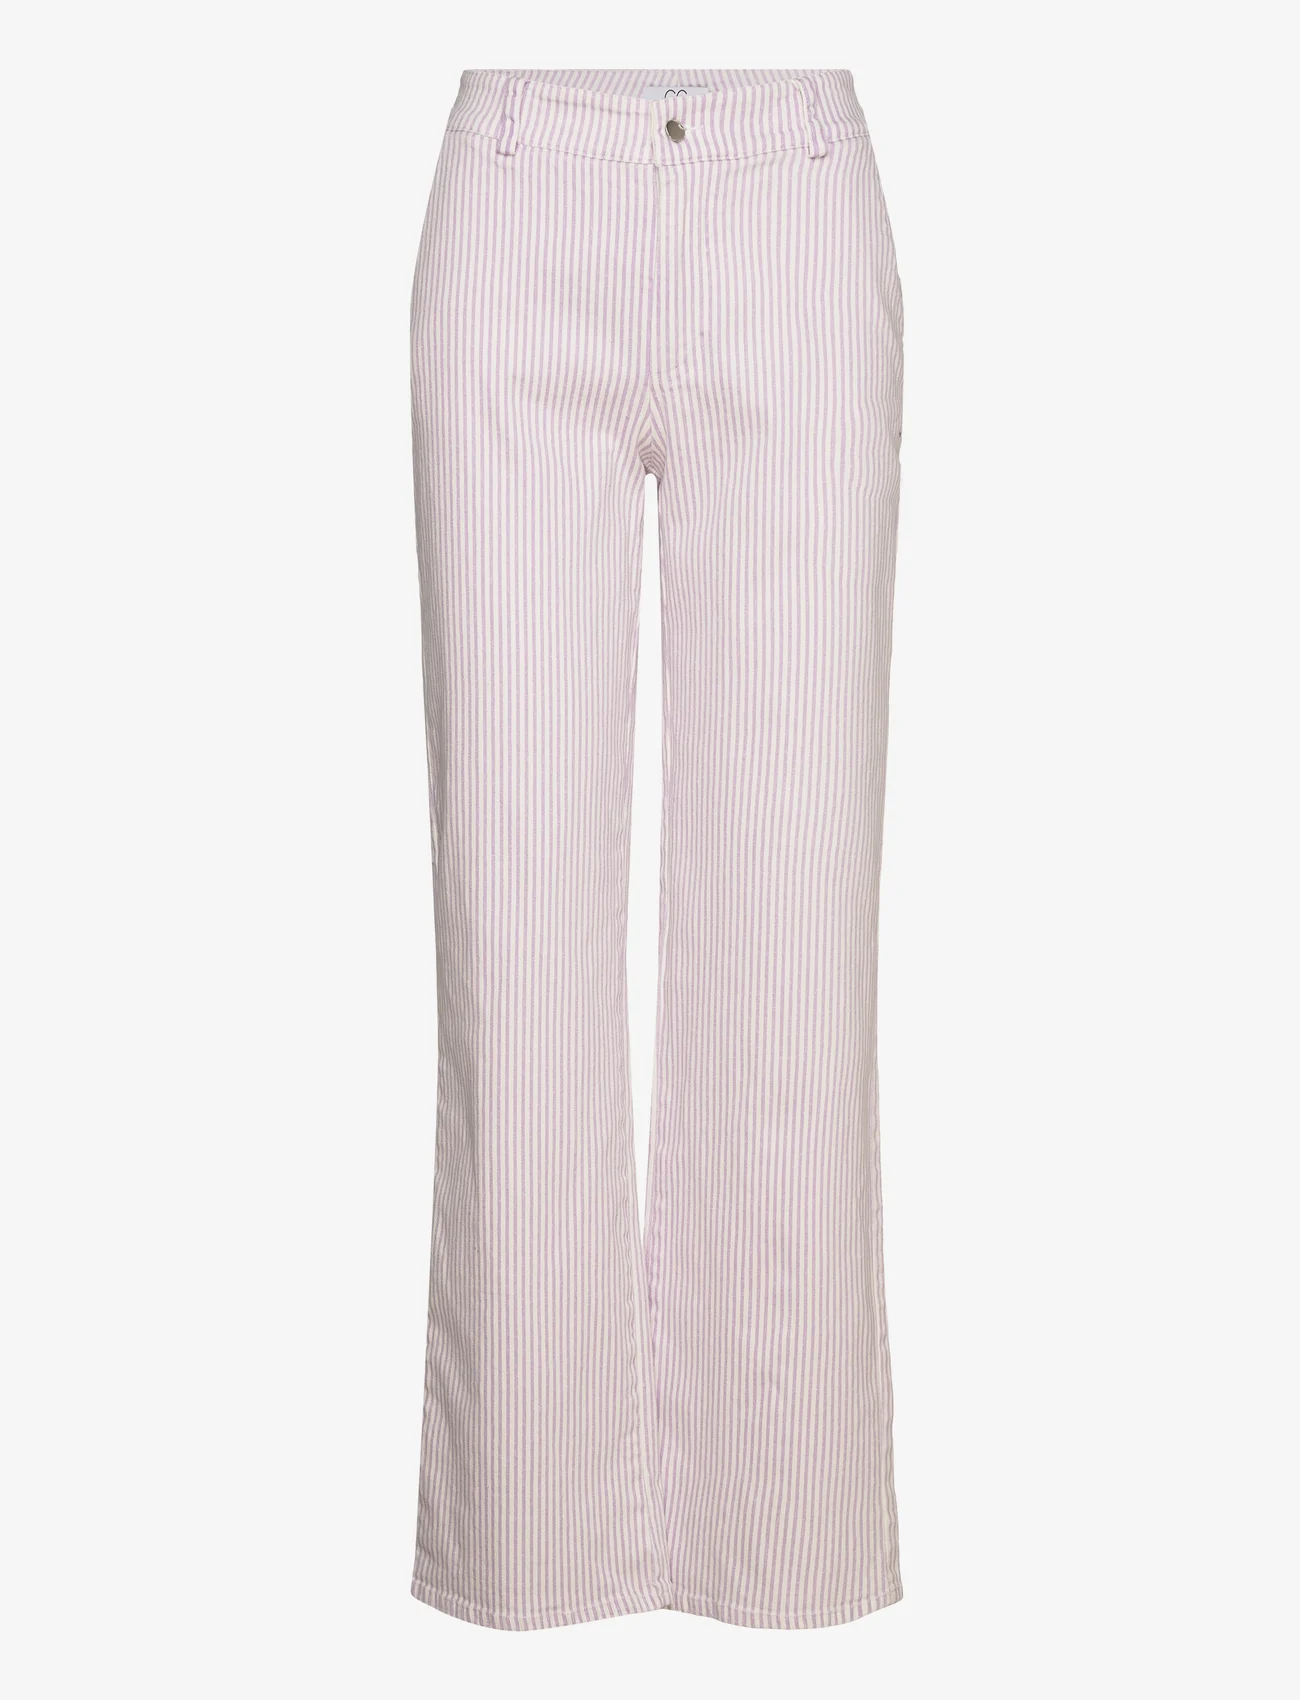 Coster Copenhagen - CC Heart MATHILDE striped pants - party wear at outlet prices - off white/purple stripe - 0